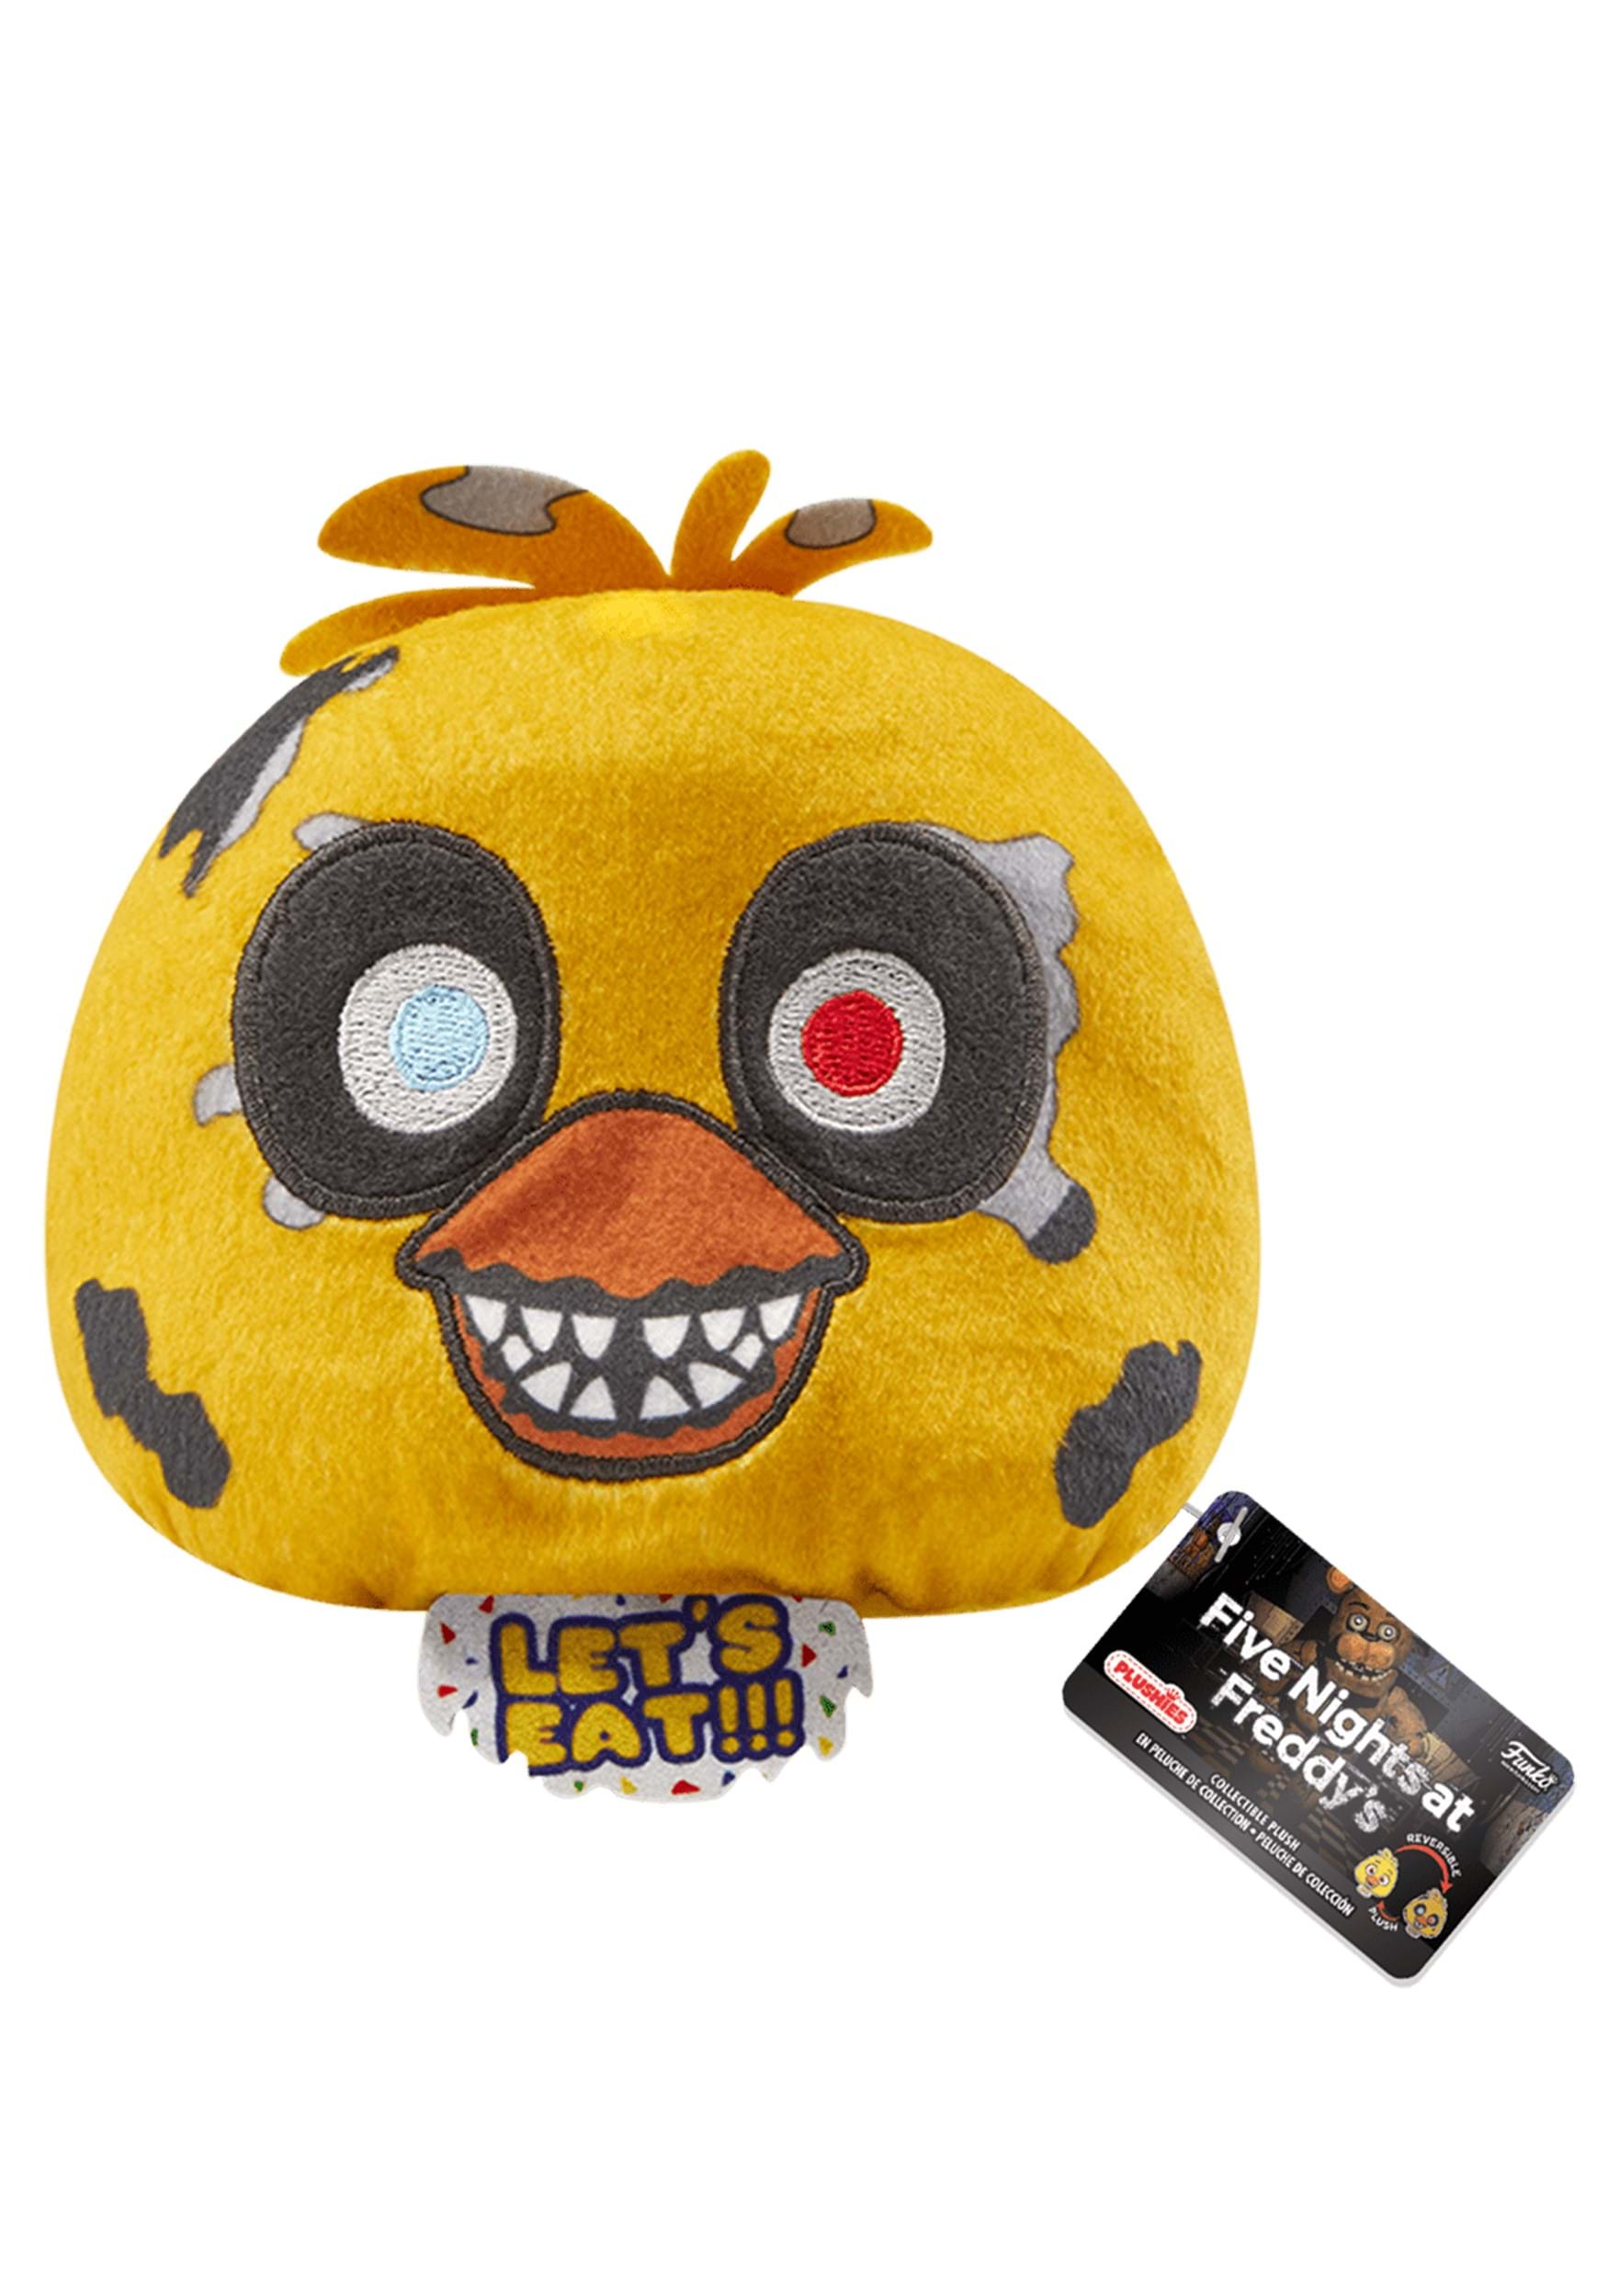 Funko Plush: Five Nights at Freddy's Reversible Heads Chica